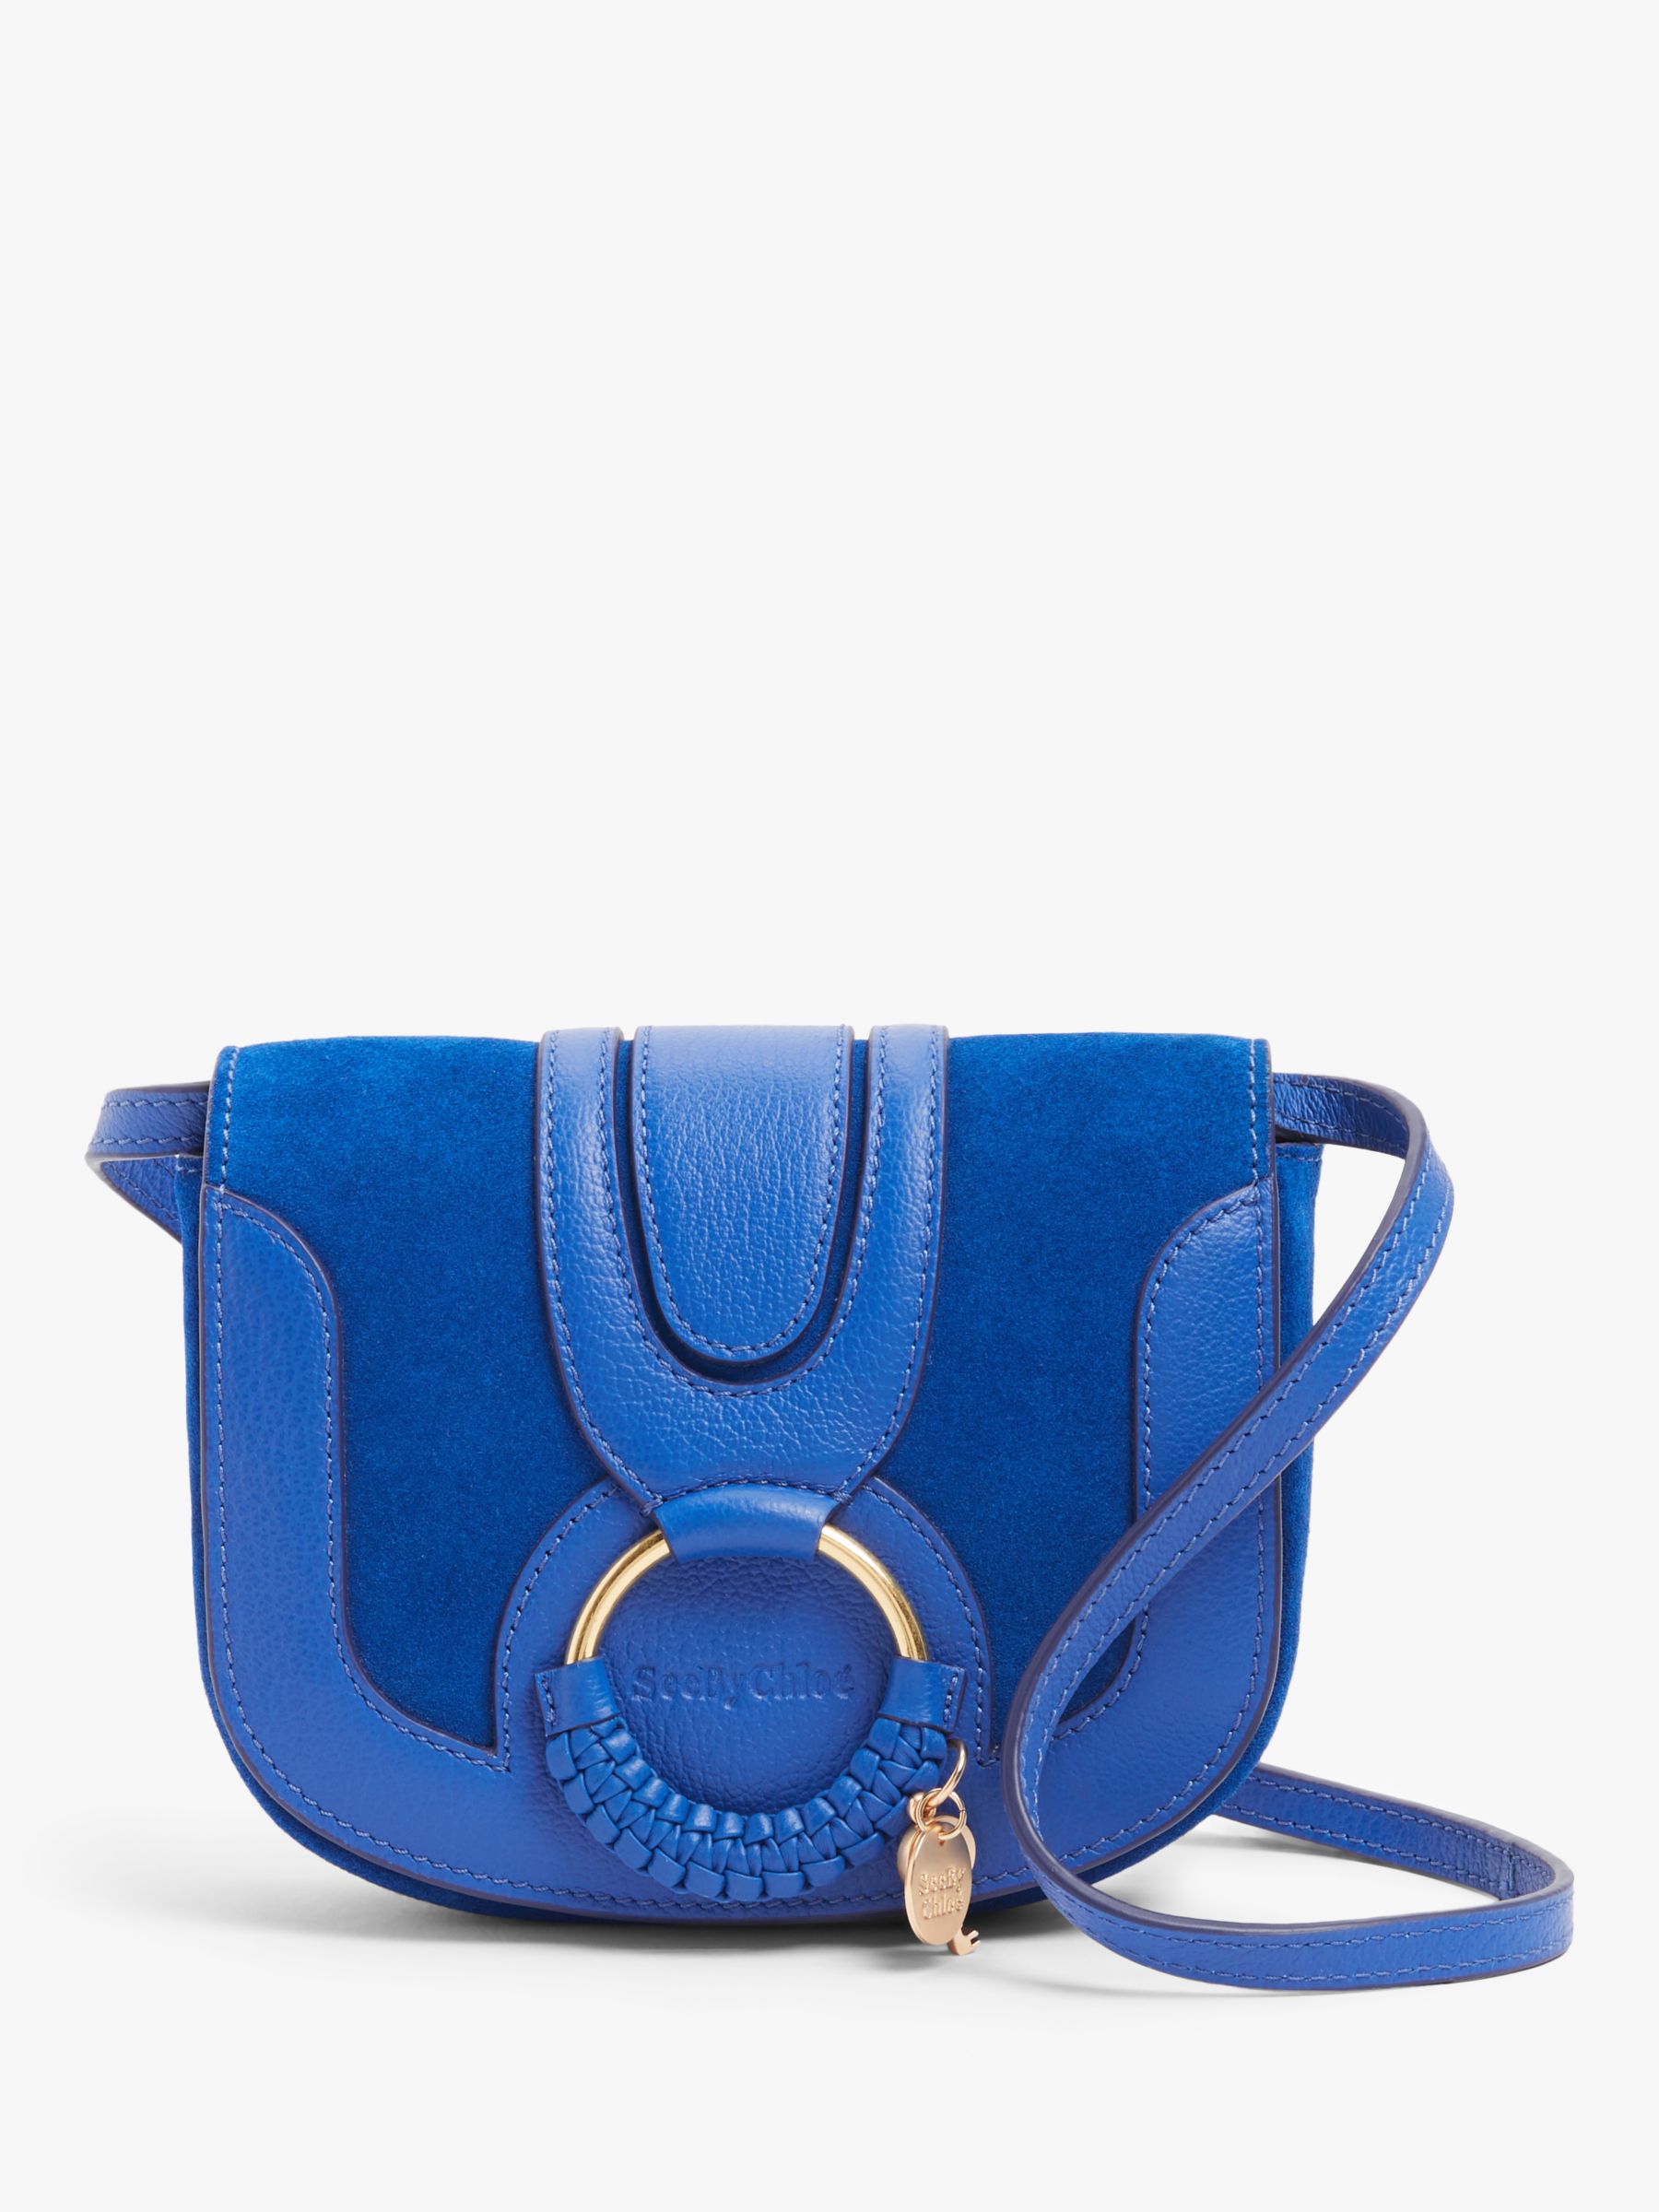 See By Chloé Mini Hana Suede Leather Satchel Bag at John Lewis & Partners